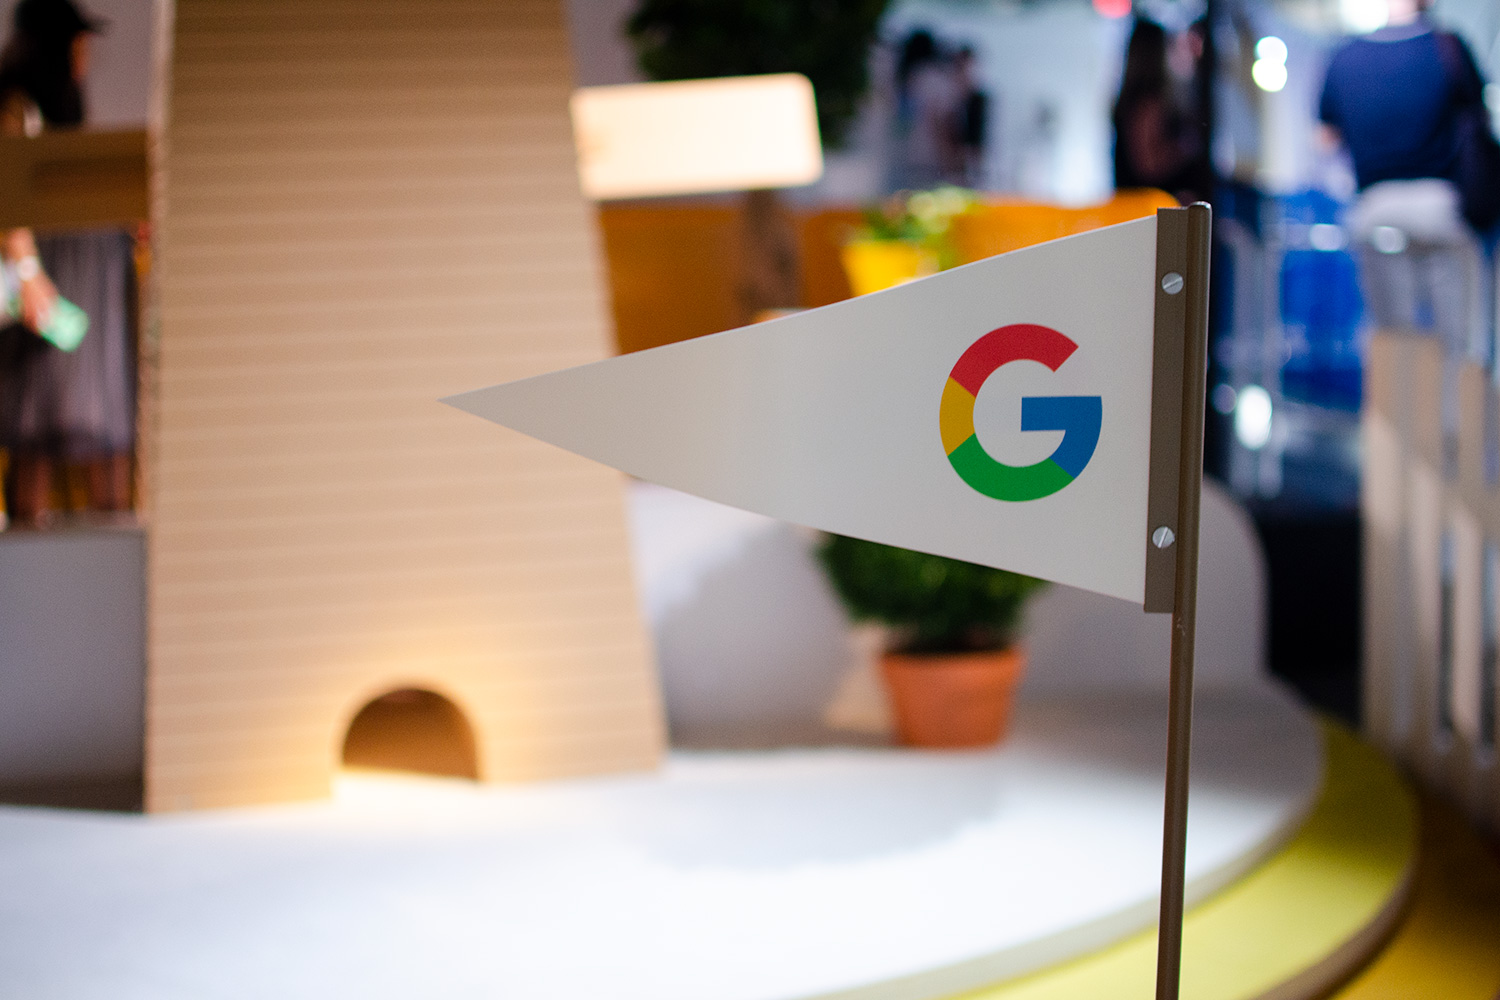 googles mini golf pop up event in nyc highlights its smart home products google flag